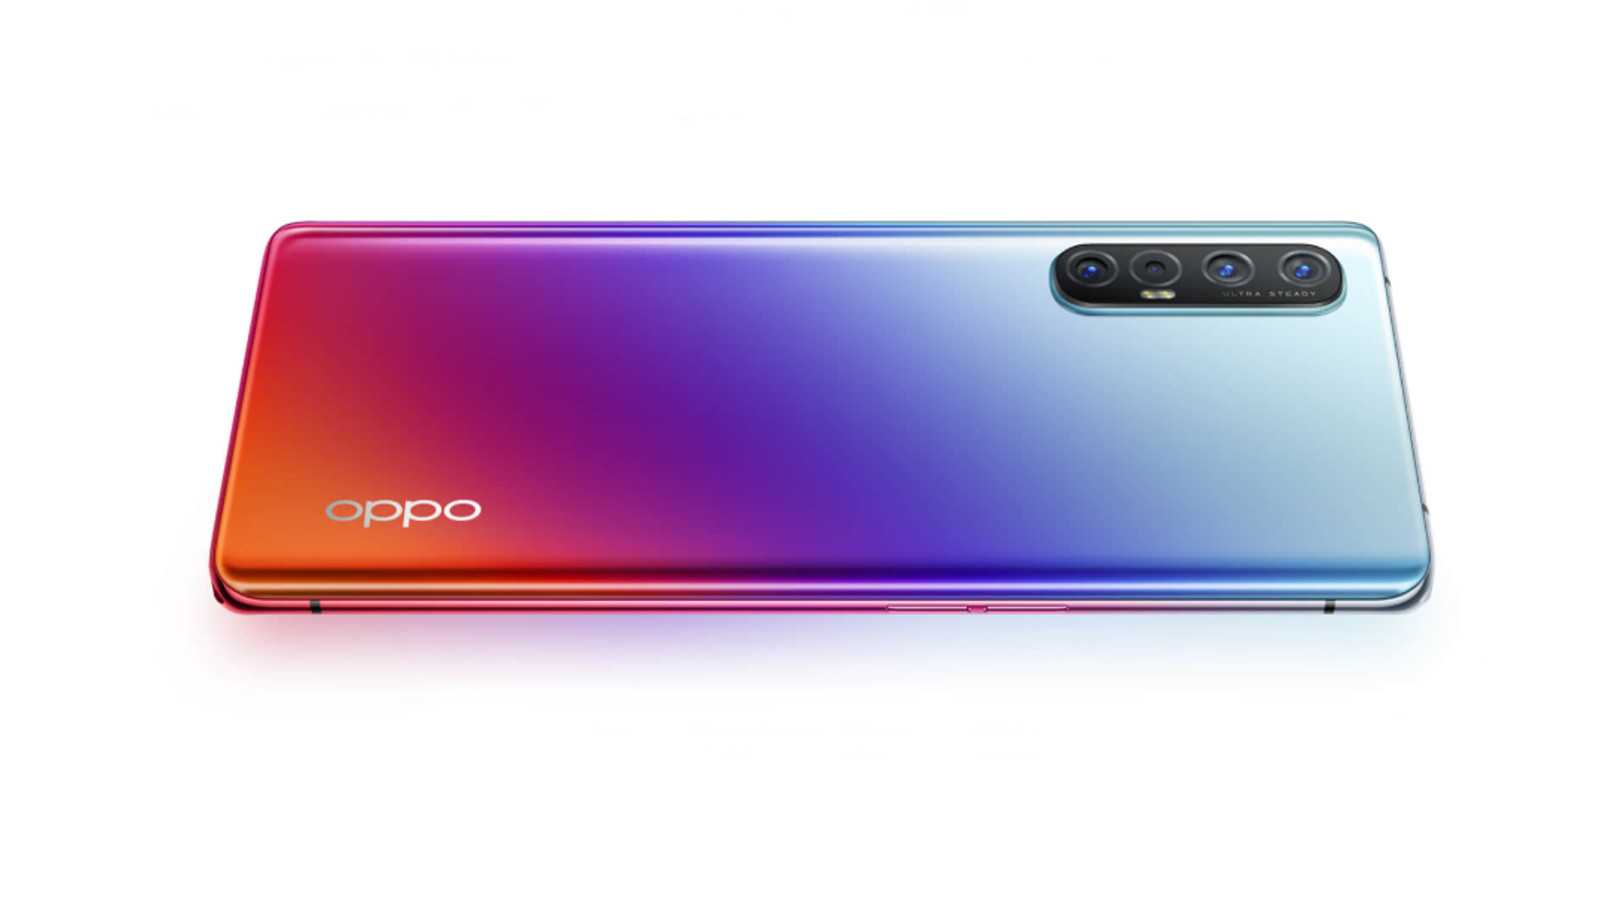 The back of the Oppo Reno 3 Pro 5G.